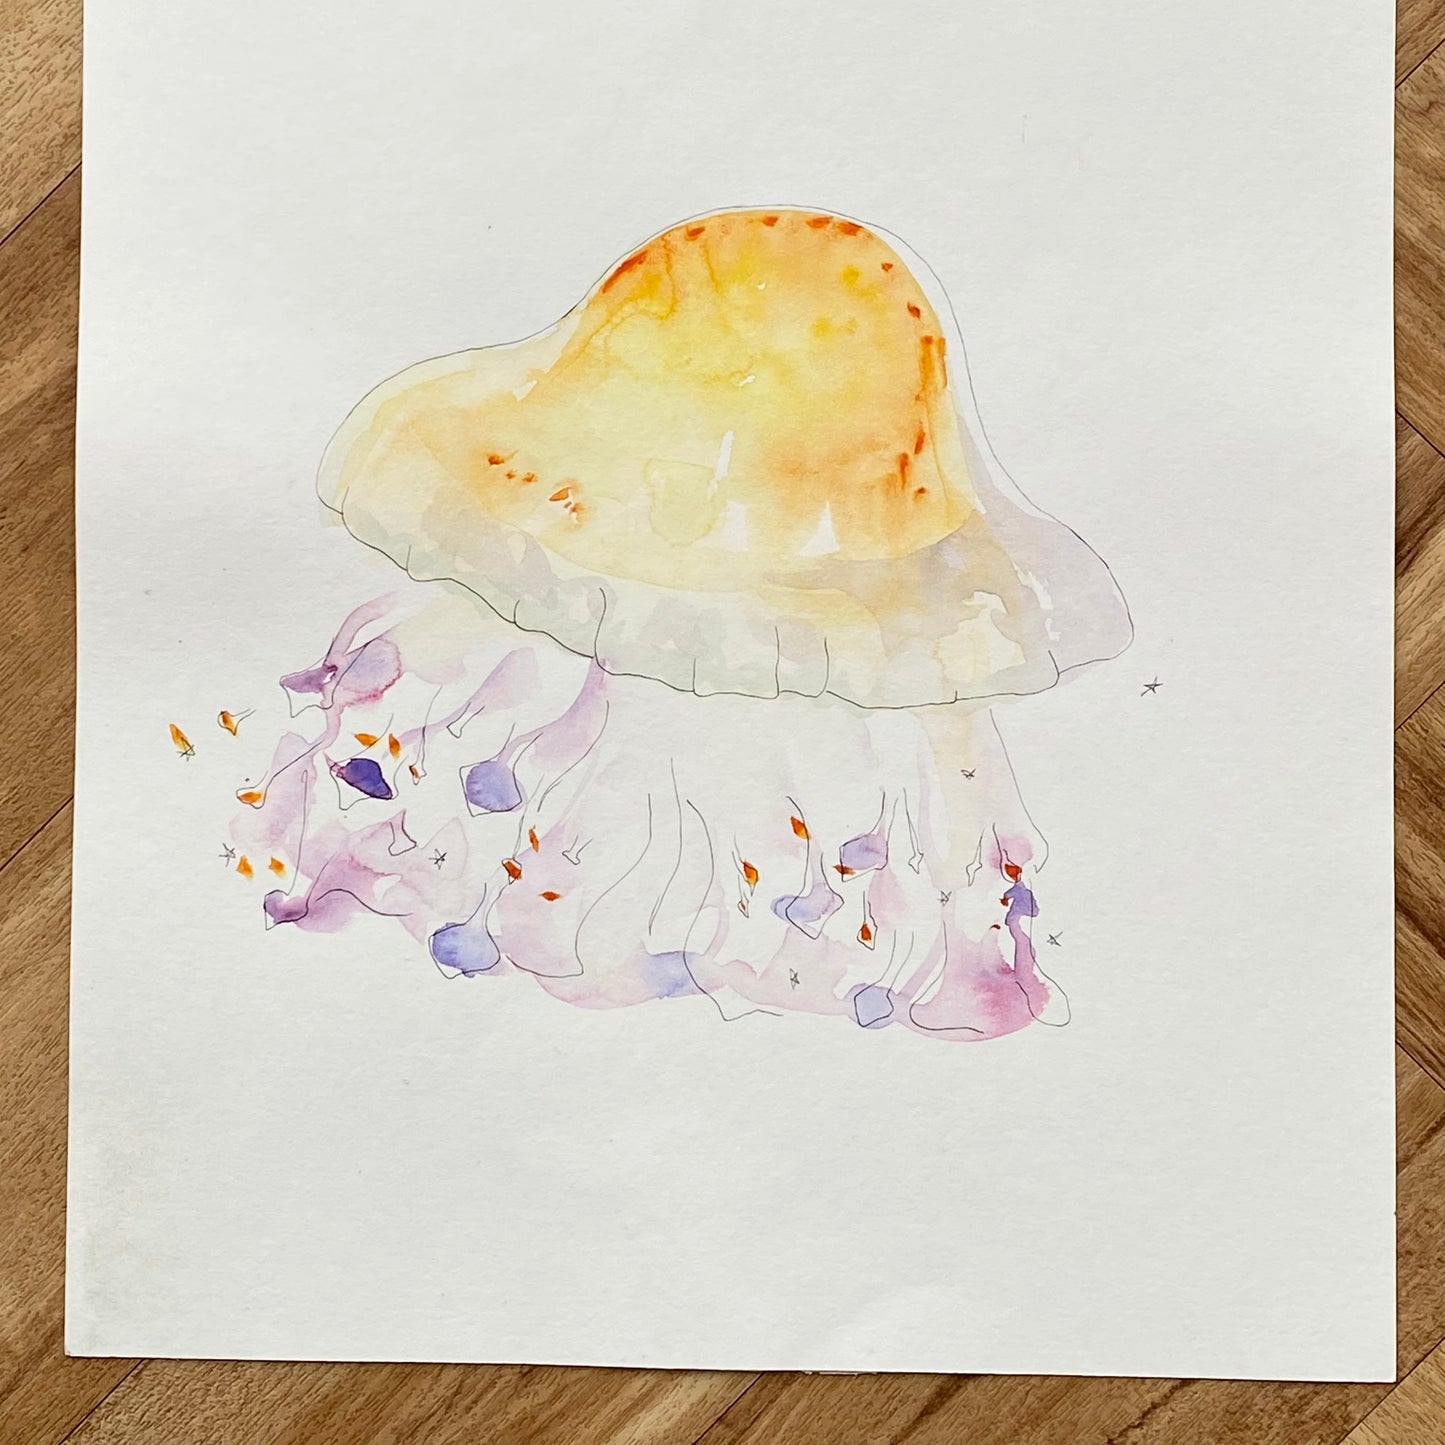 Original sketches and drafts - Fried Egg Jellyfish